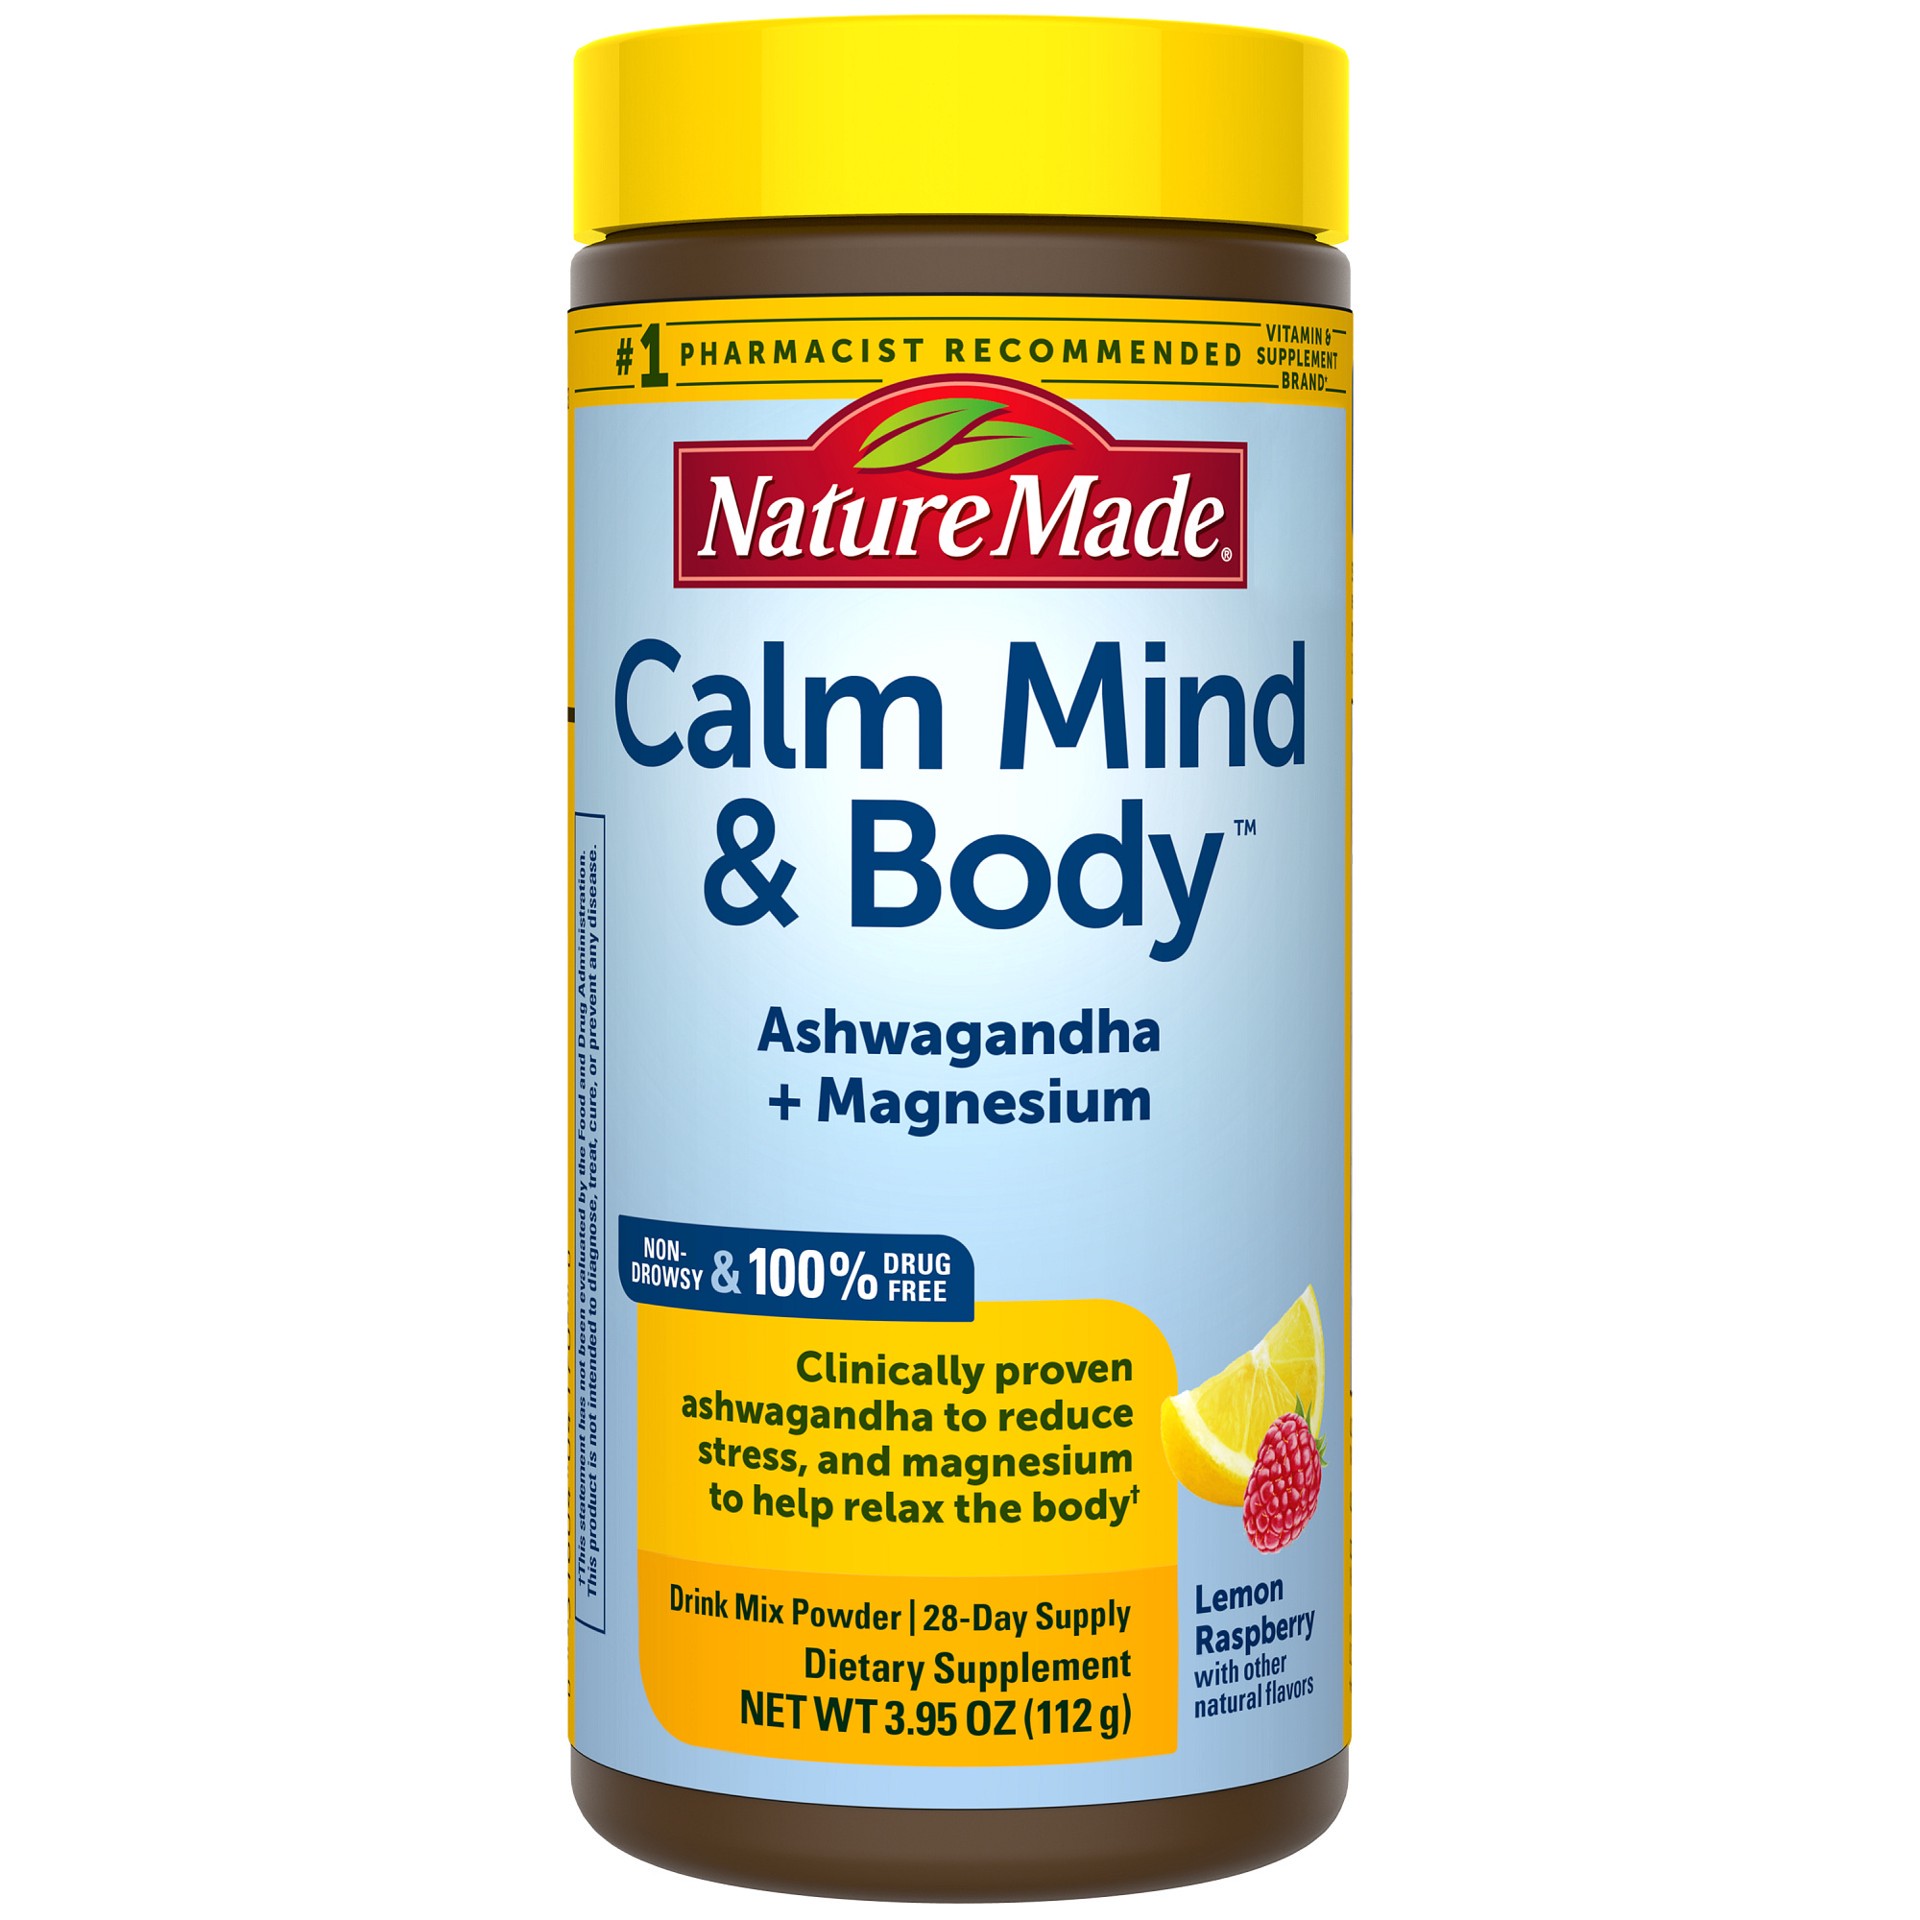 slide 1 of 10, Nature Made Calm Mind & Body Drink Mix, Ashwagandha to Reduce Stress, Magnesium to Help Relax Your Body, Non-Drowsy, 100% Drug-Free, Lemon Raspberry, 3.95 oz, 95 oz